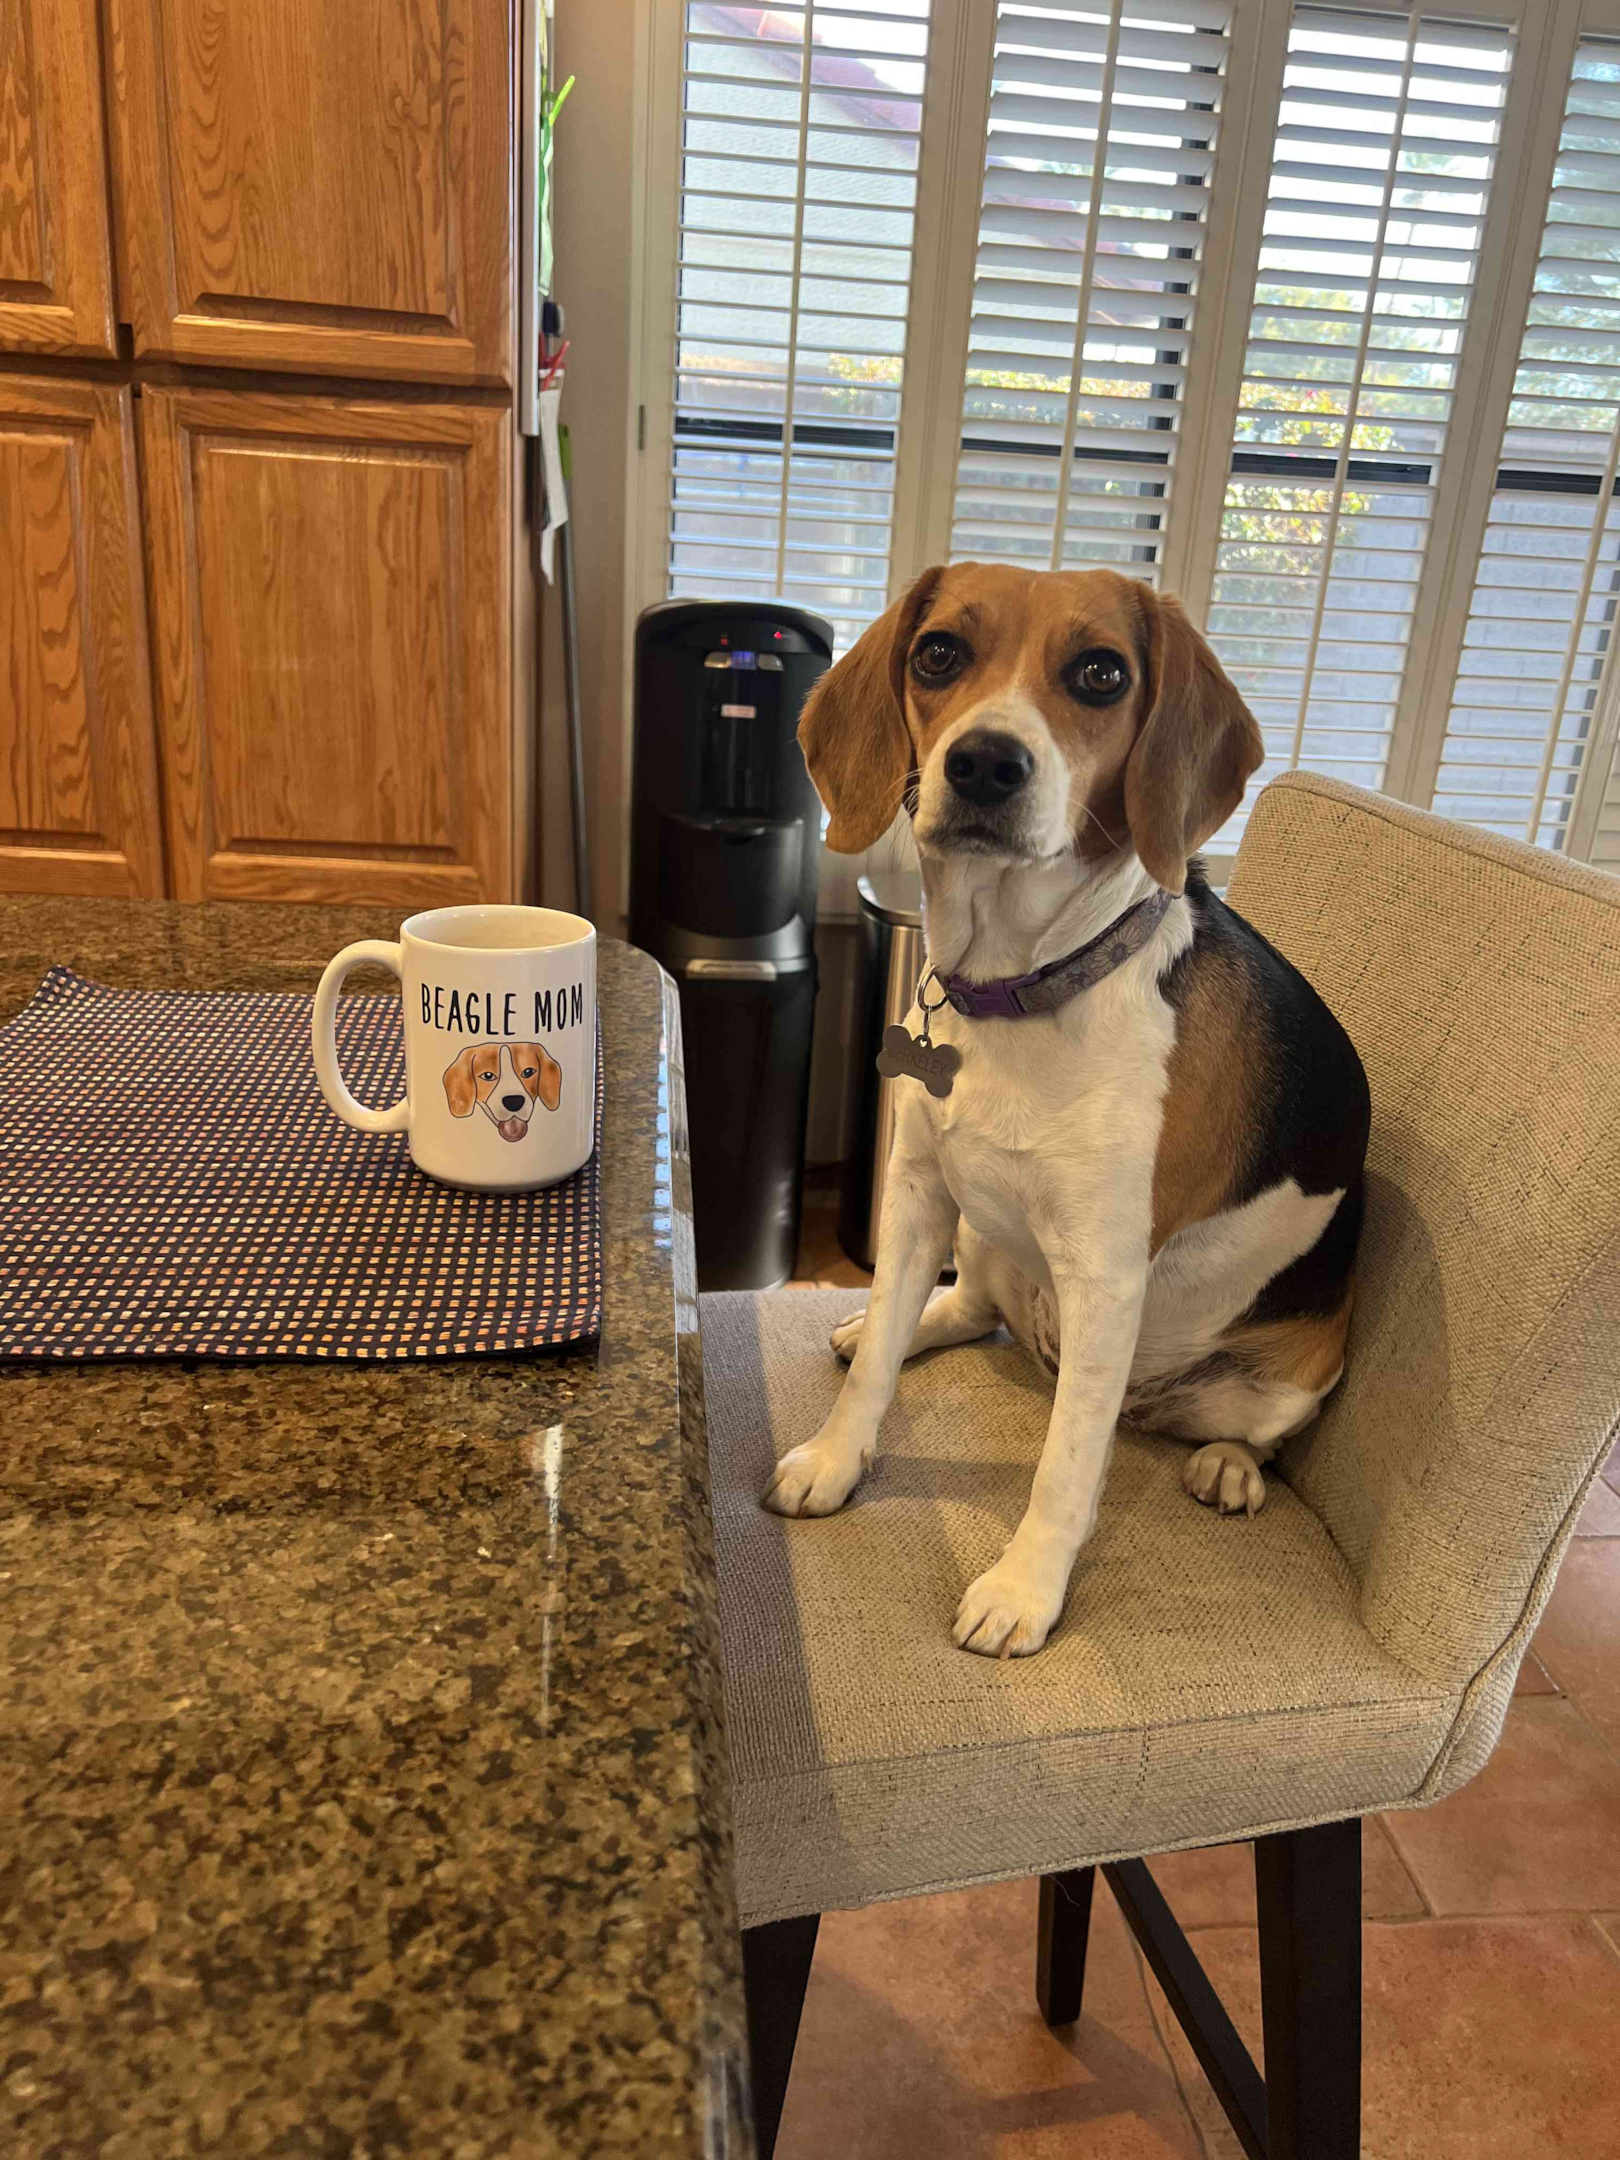 Beagle dog patiently waiting for his food